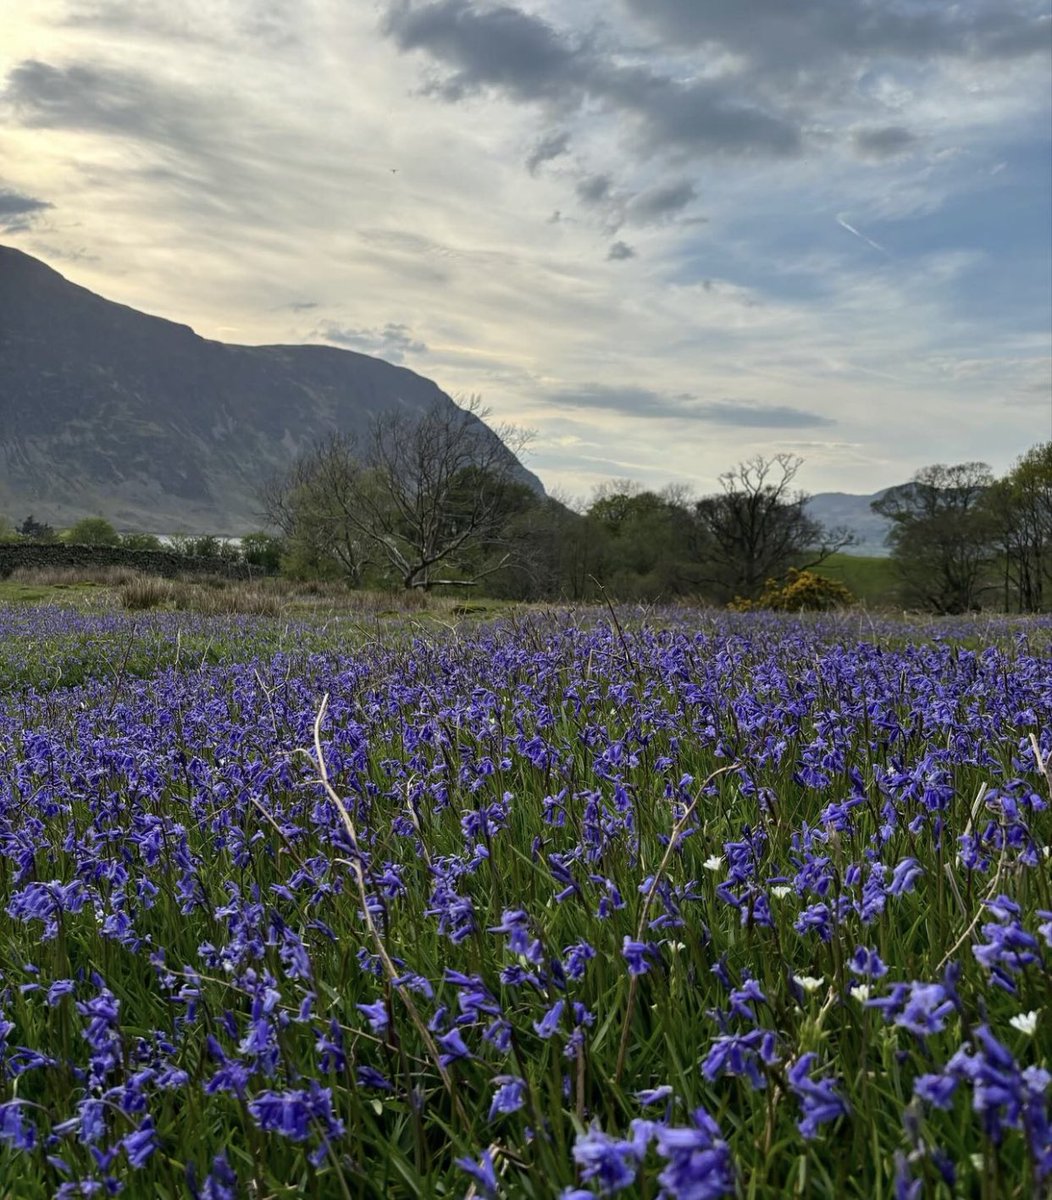 If you’re heading to Rannerdale Knots to see the magical bluebells you might want to pop in here on your way for a snack in our Tearoom #braithwaite #keswick #lakedistrict #photography #cumbria #lakes #c2c #nationalwalkingmonth #ramblers